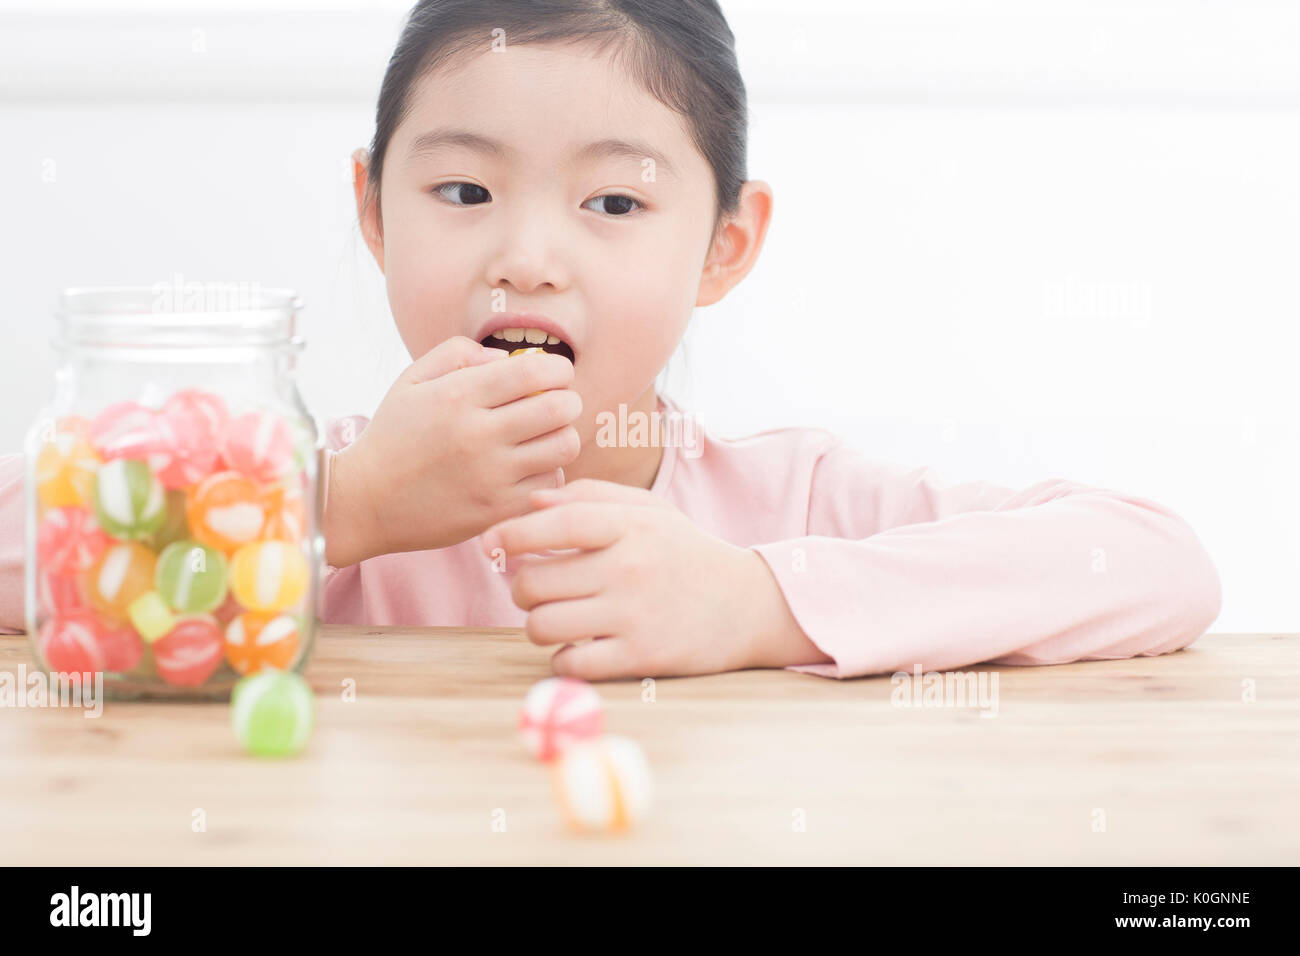 Portrait of smiling girl with candies Stock Photo